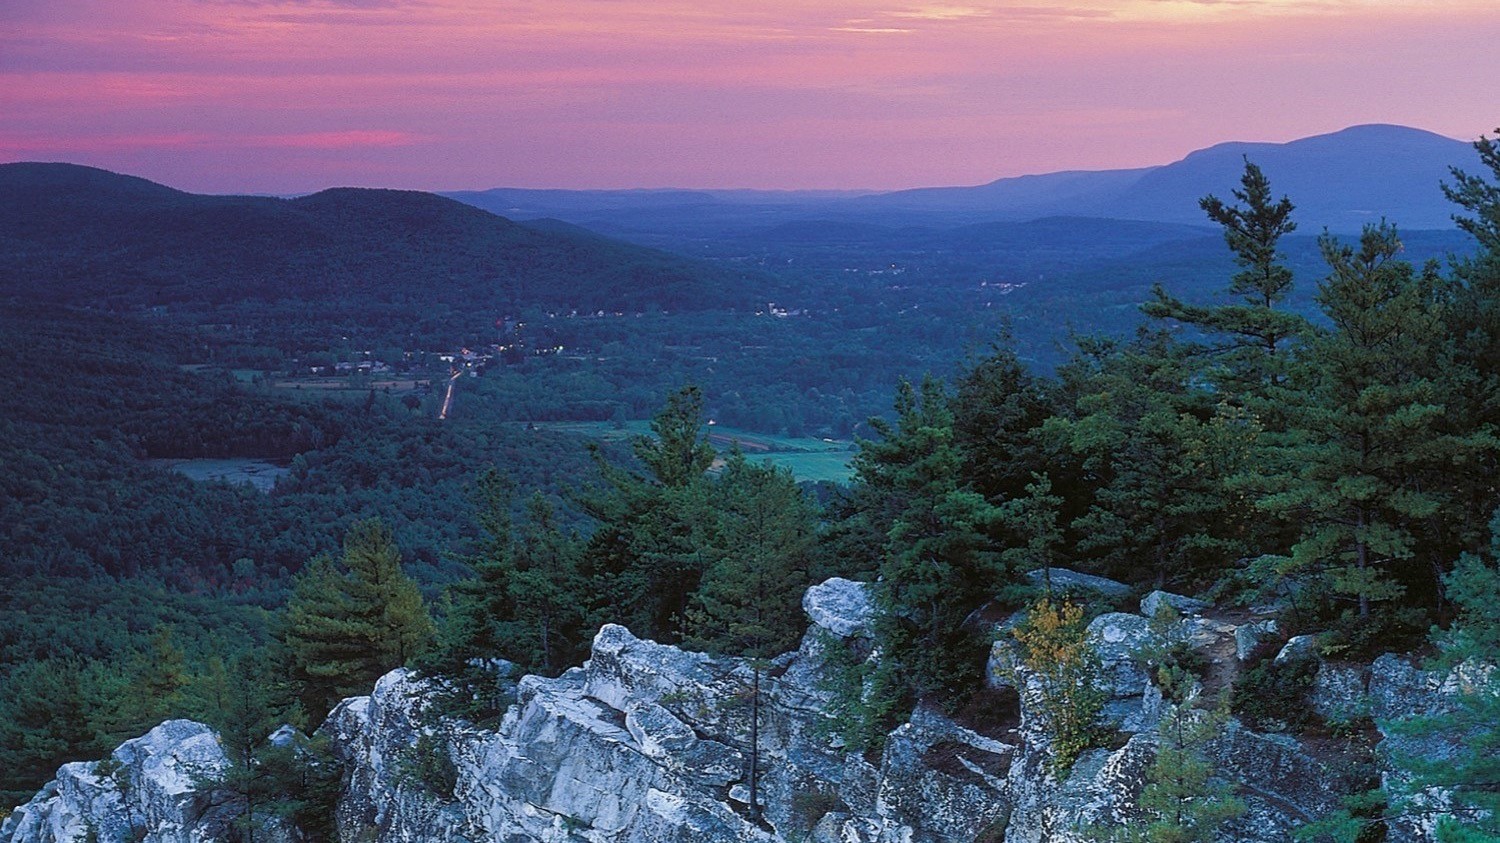 monument mountain - great barrington, ma - best hikes in the berkshires